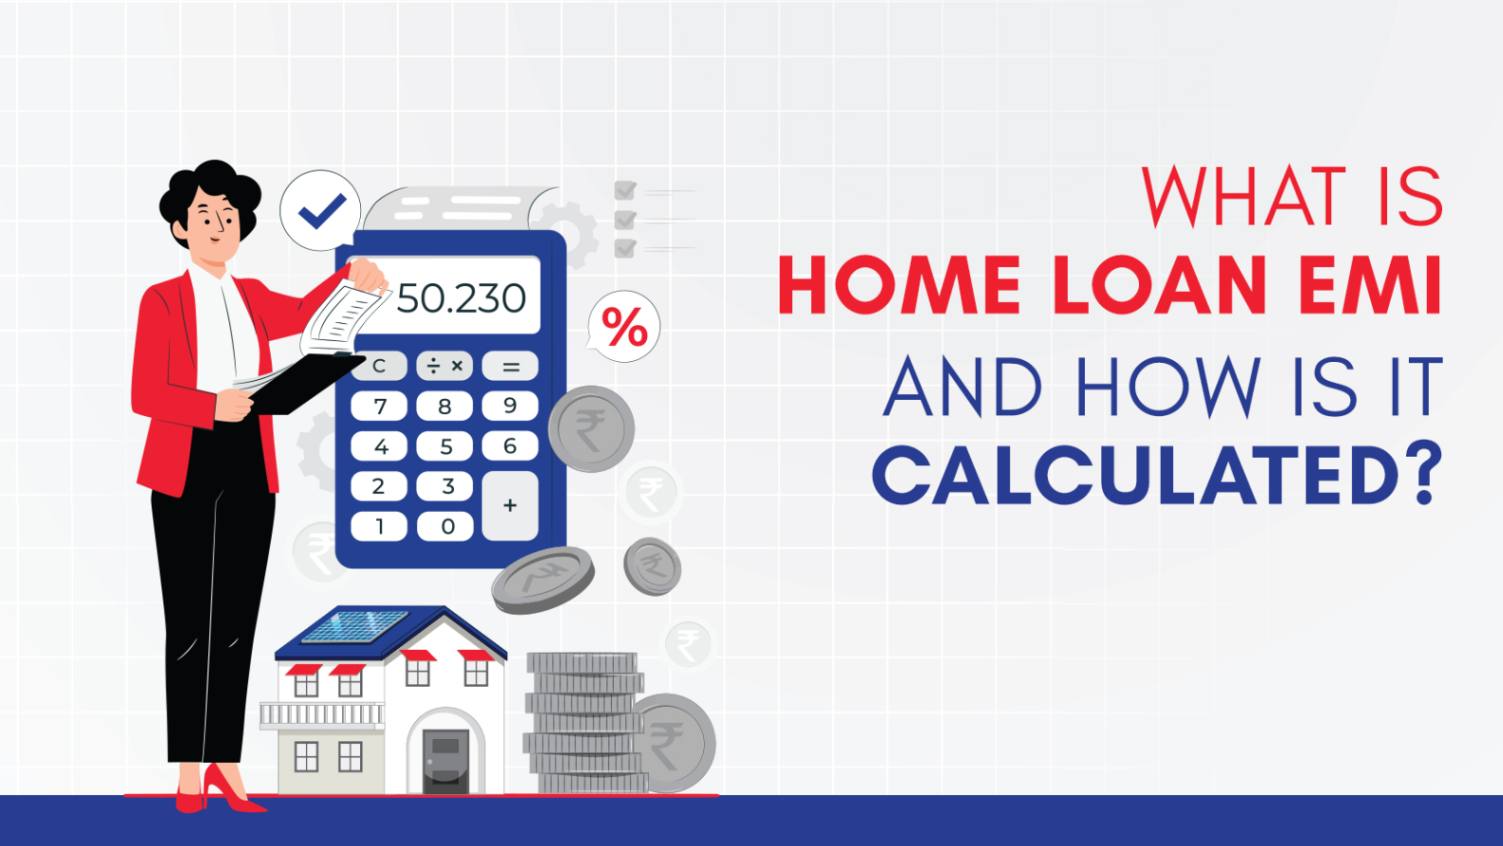 What Is Home Loan EMI And How Is It Calculated?